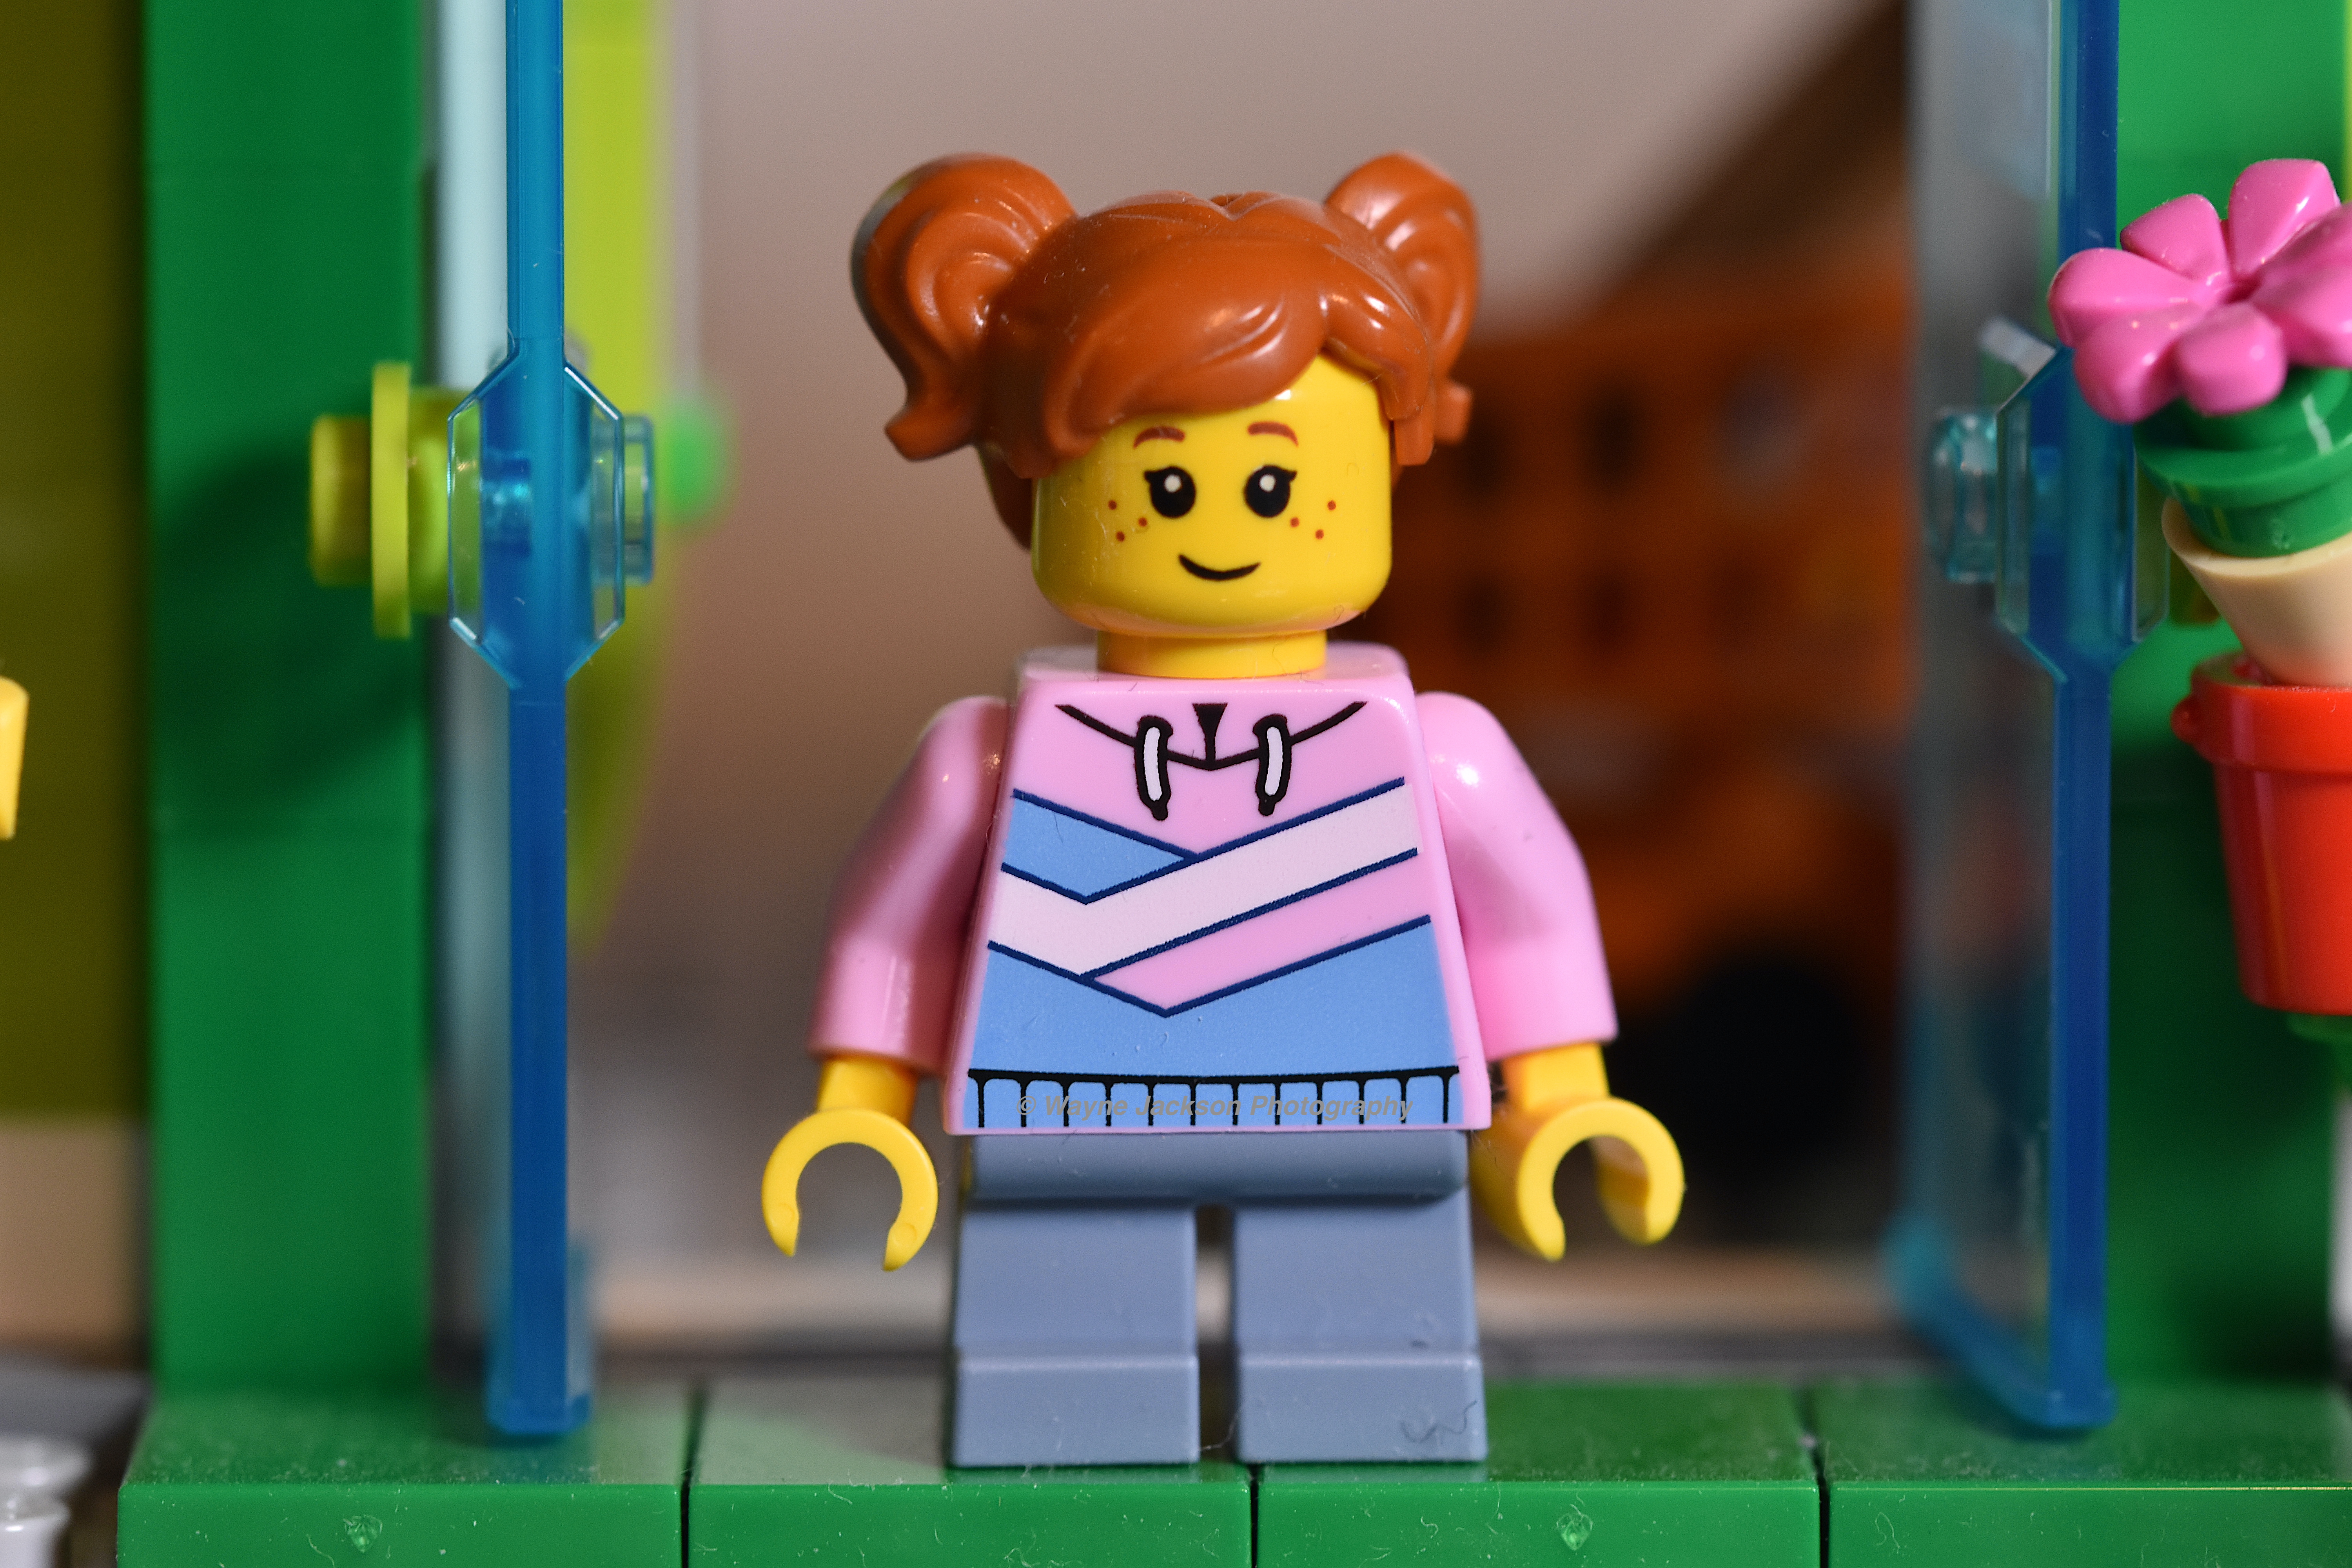 A female Lego minifigure from the Grocery Store set 60347 with dust on